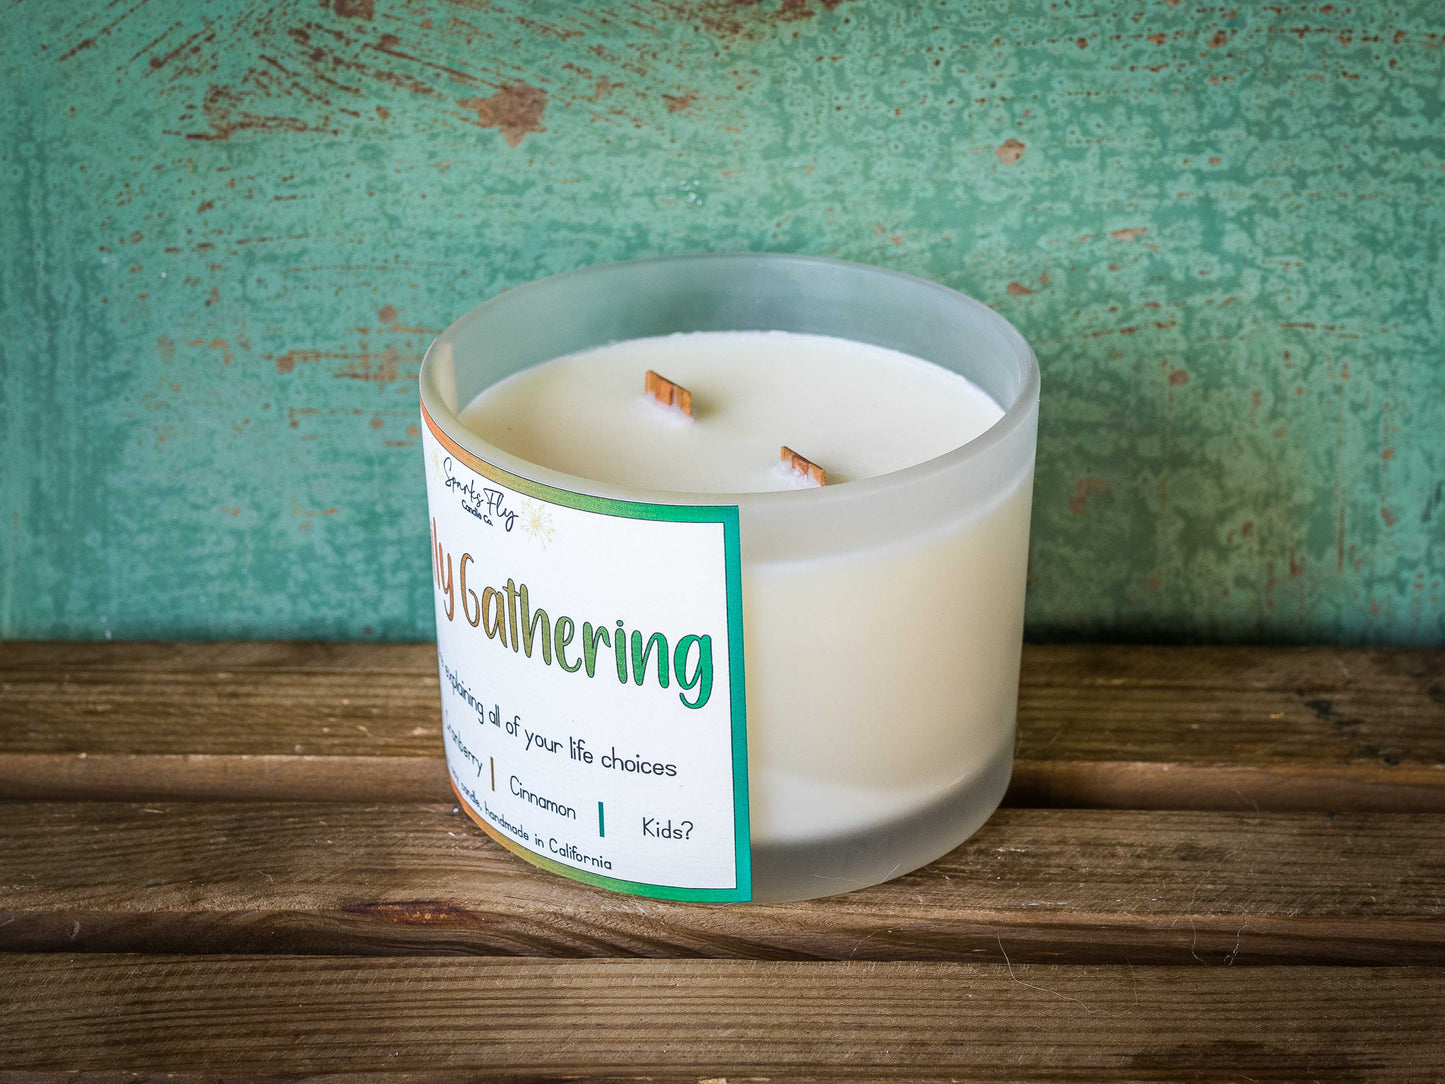 Family Gathering Soy Candle